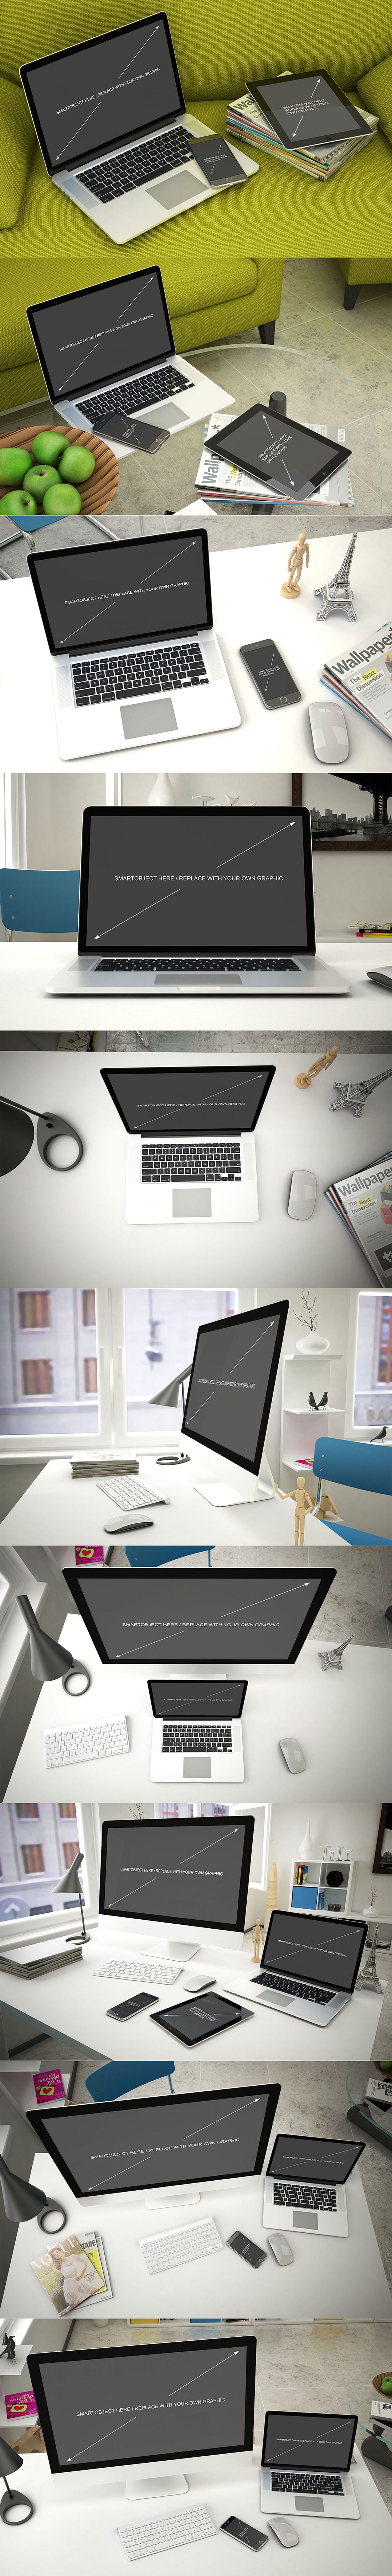 Gray MacBook in different situations and from all sides to assess the general appearance of the gadget.